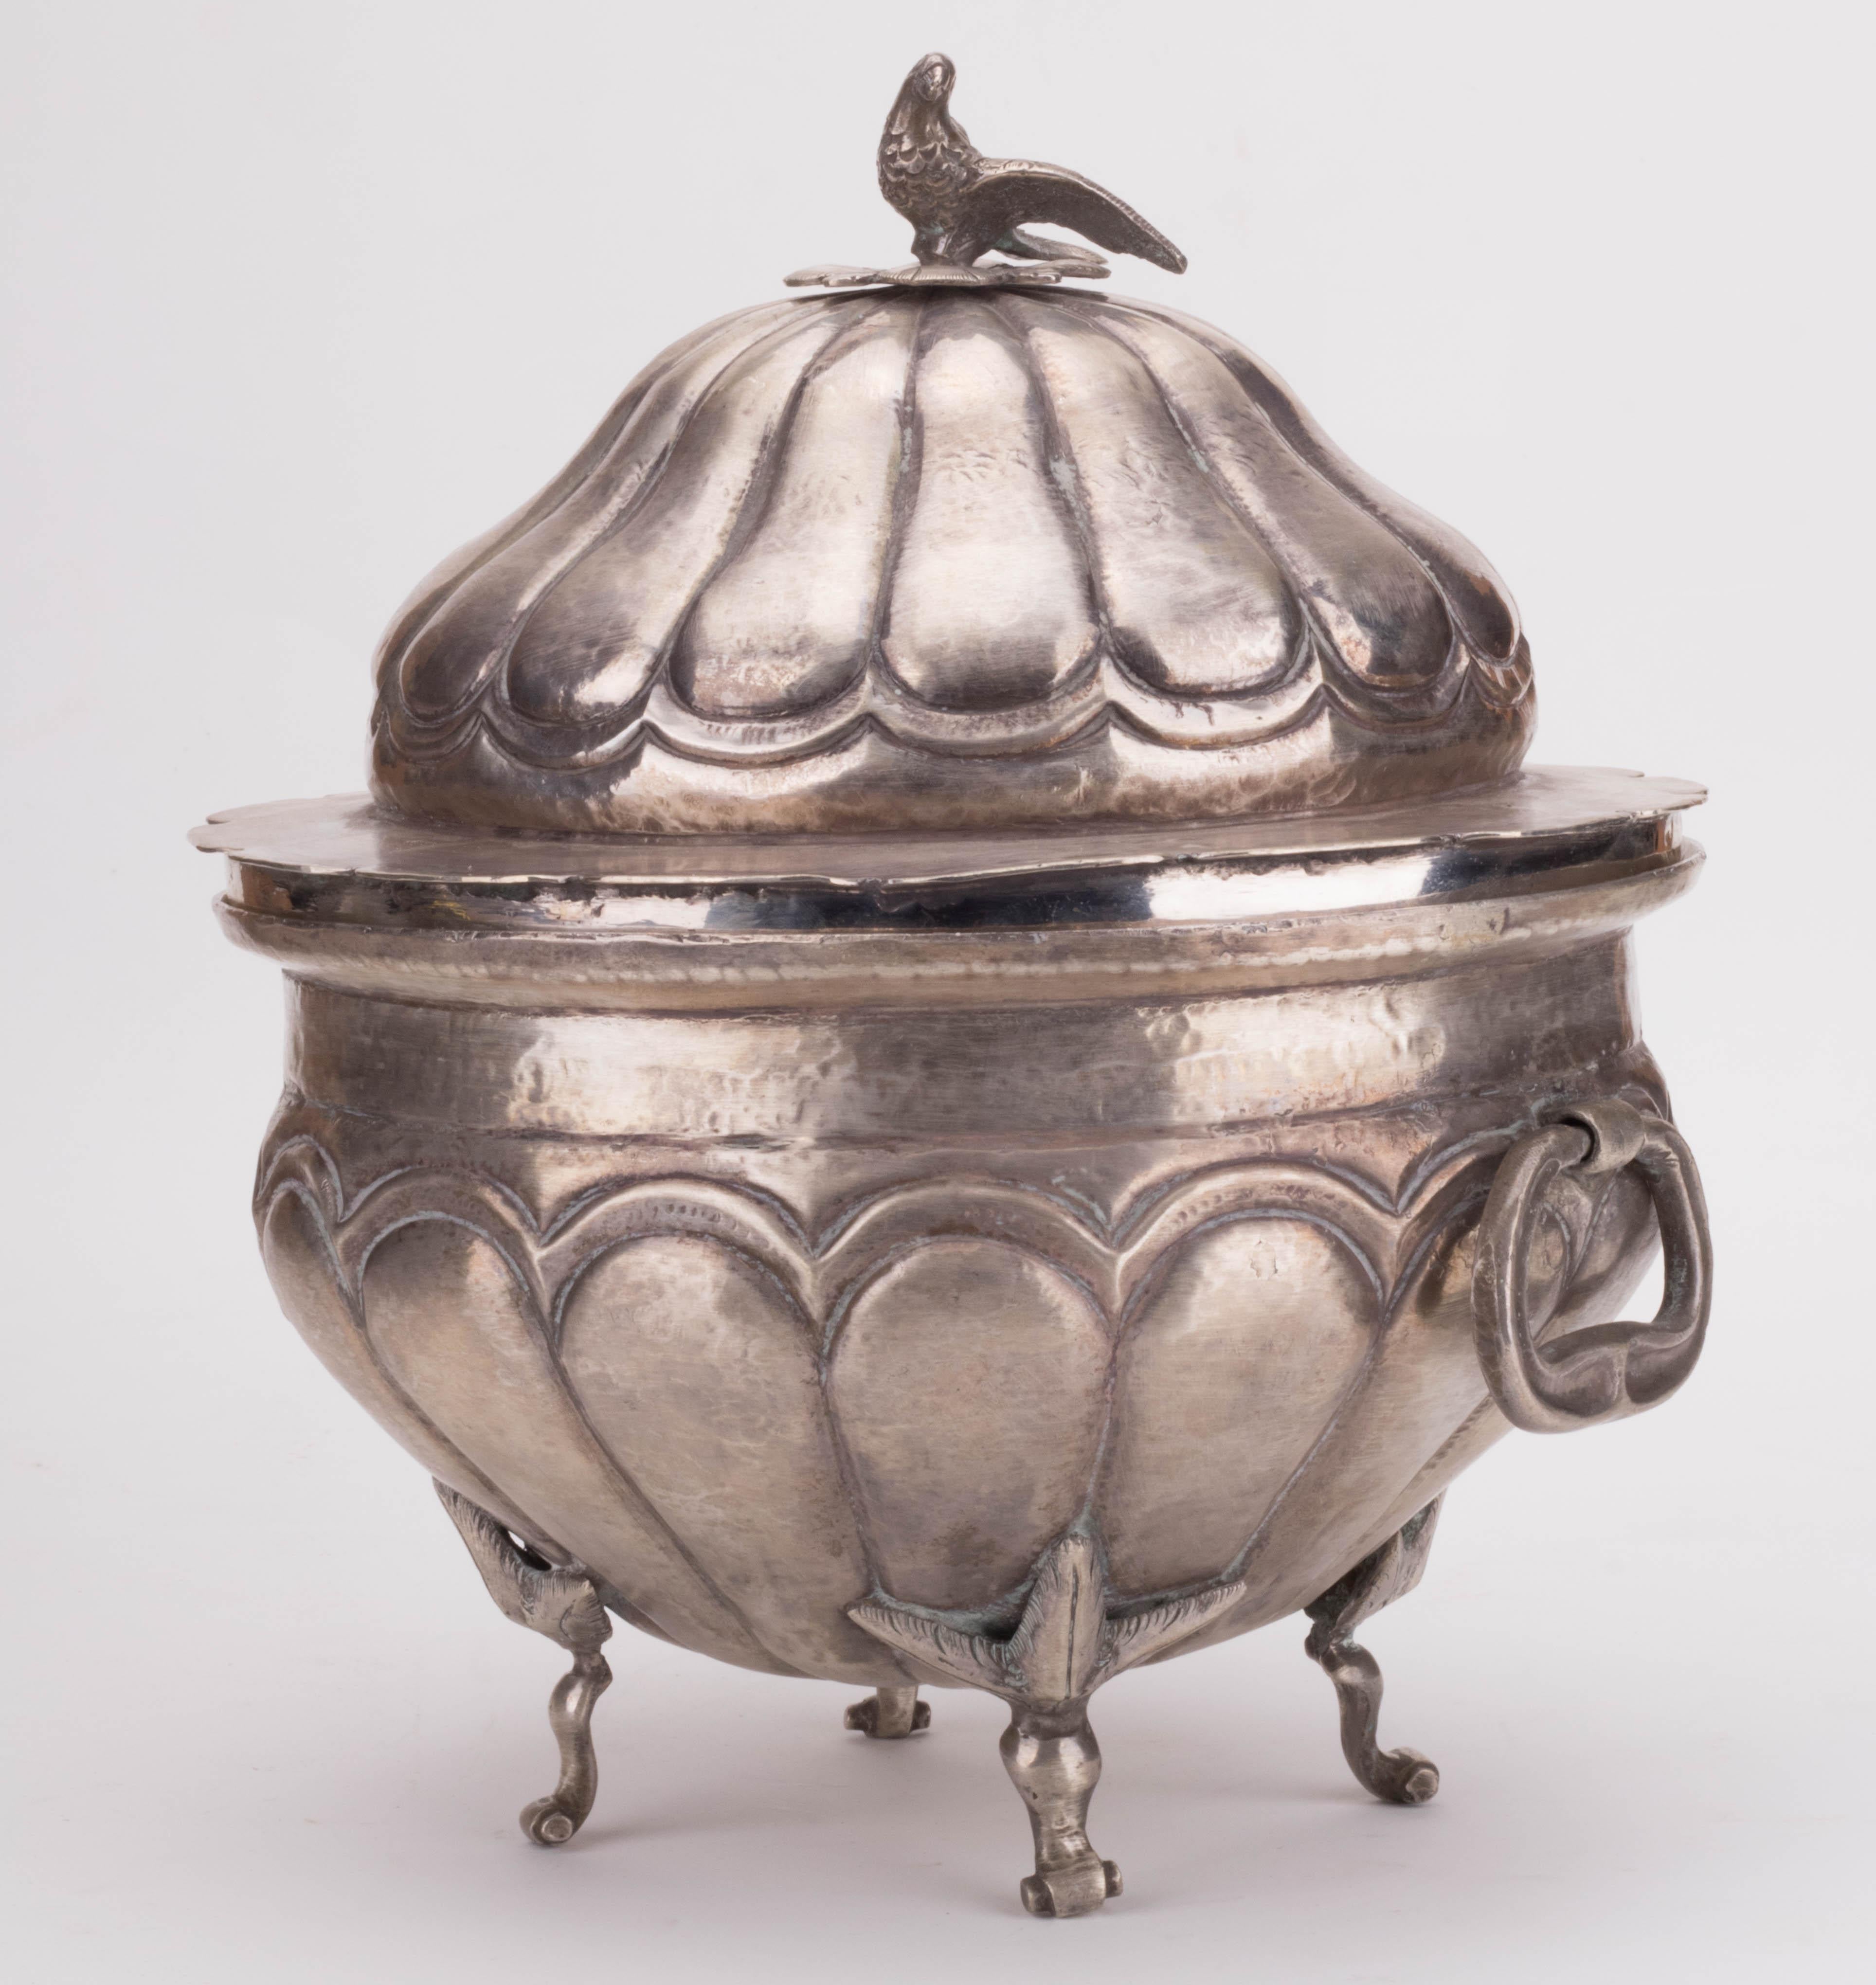 1780s colonial Peruvian tureen with side handles and dove shaped knob on lid. 

Silver by weight: 1.330 g.